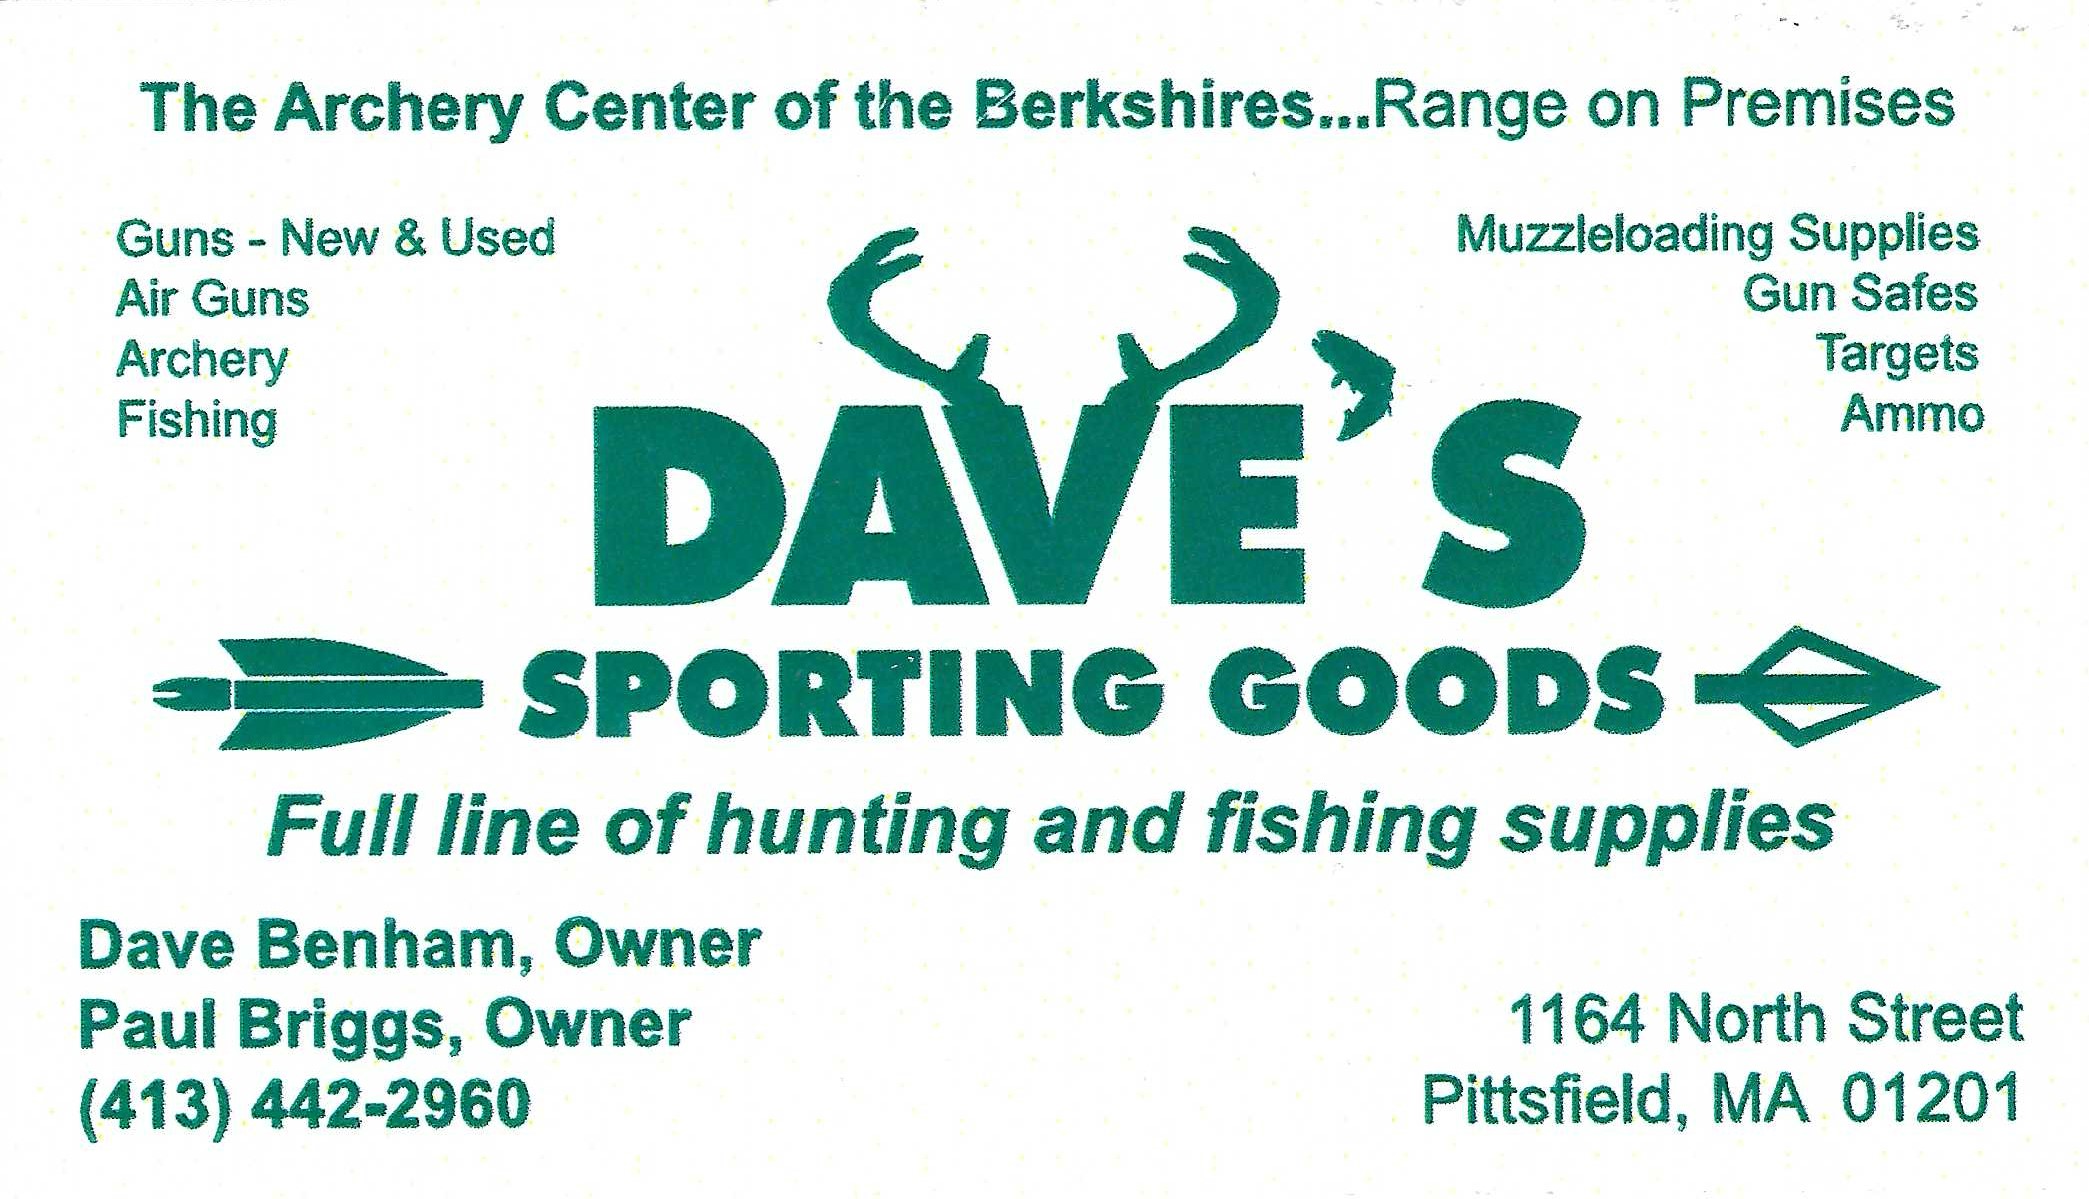 Dave's Sporting Goods